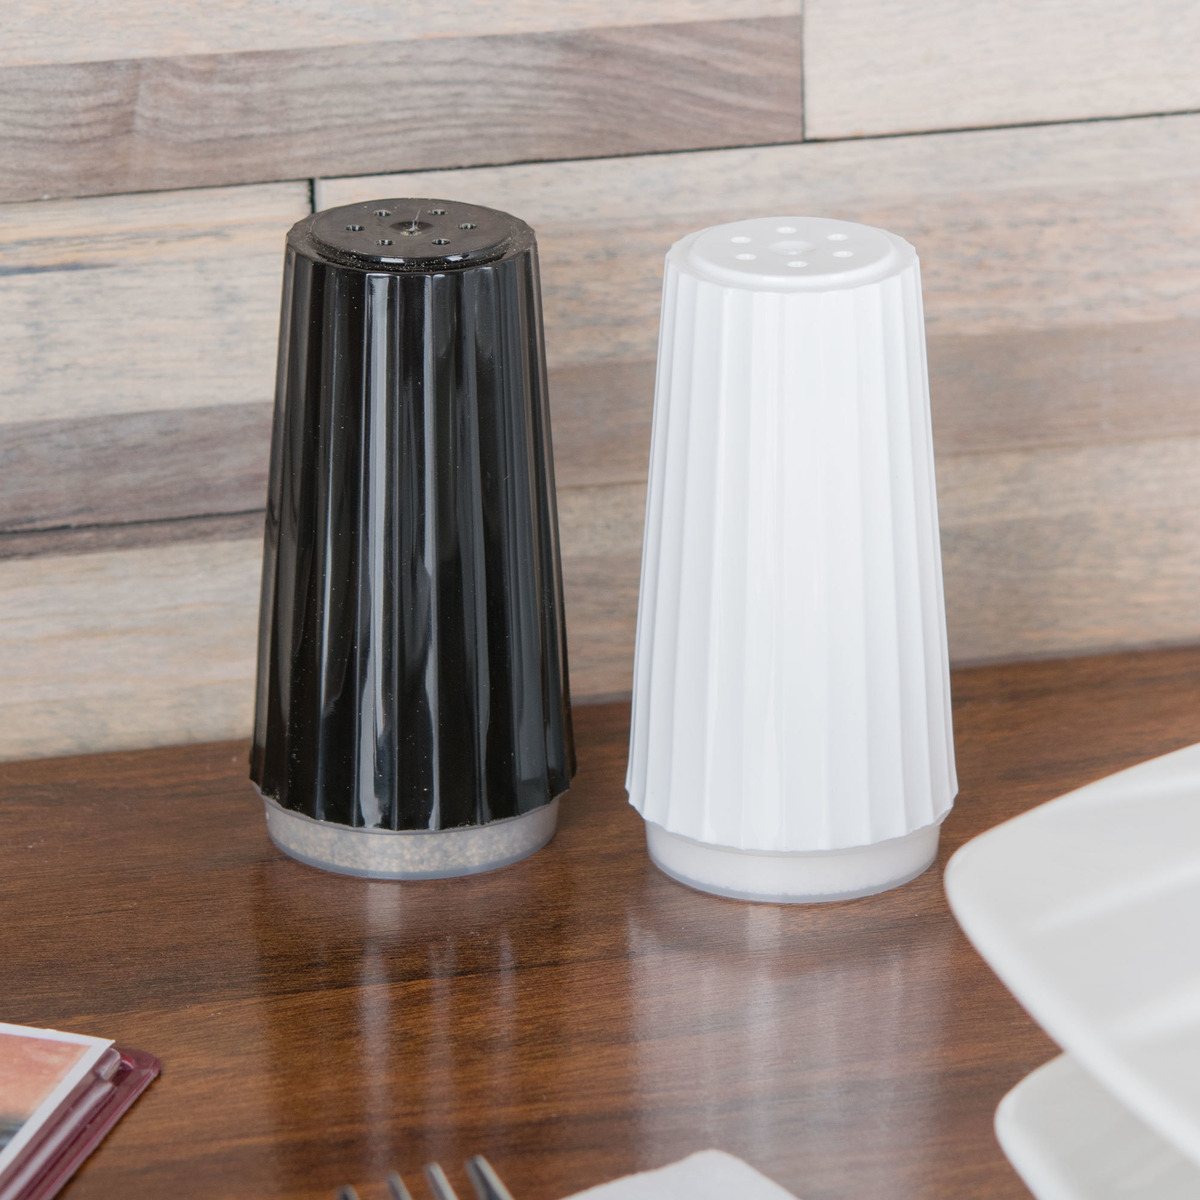 How To Open Pre-Filled Disposable Salt And Pepper Shakers